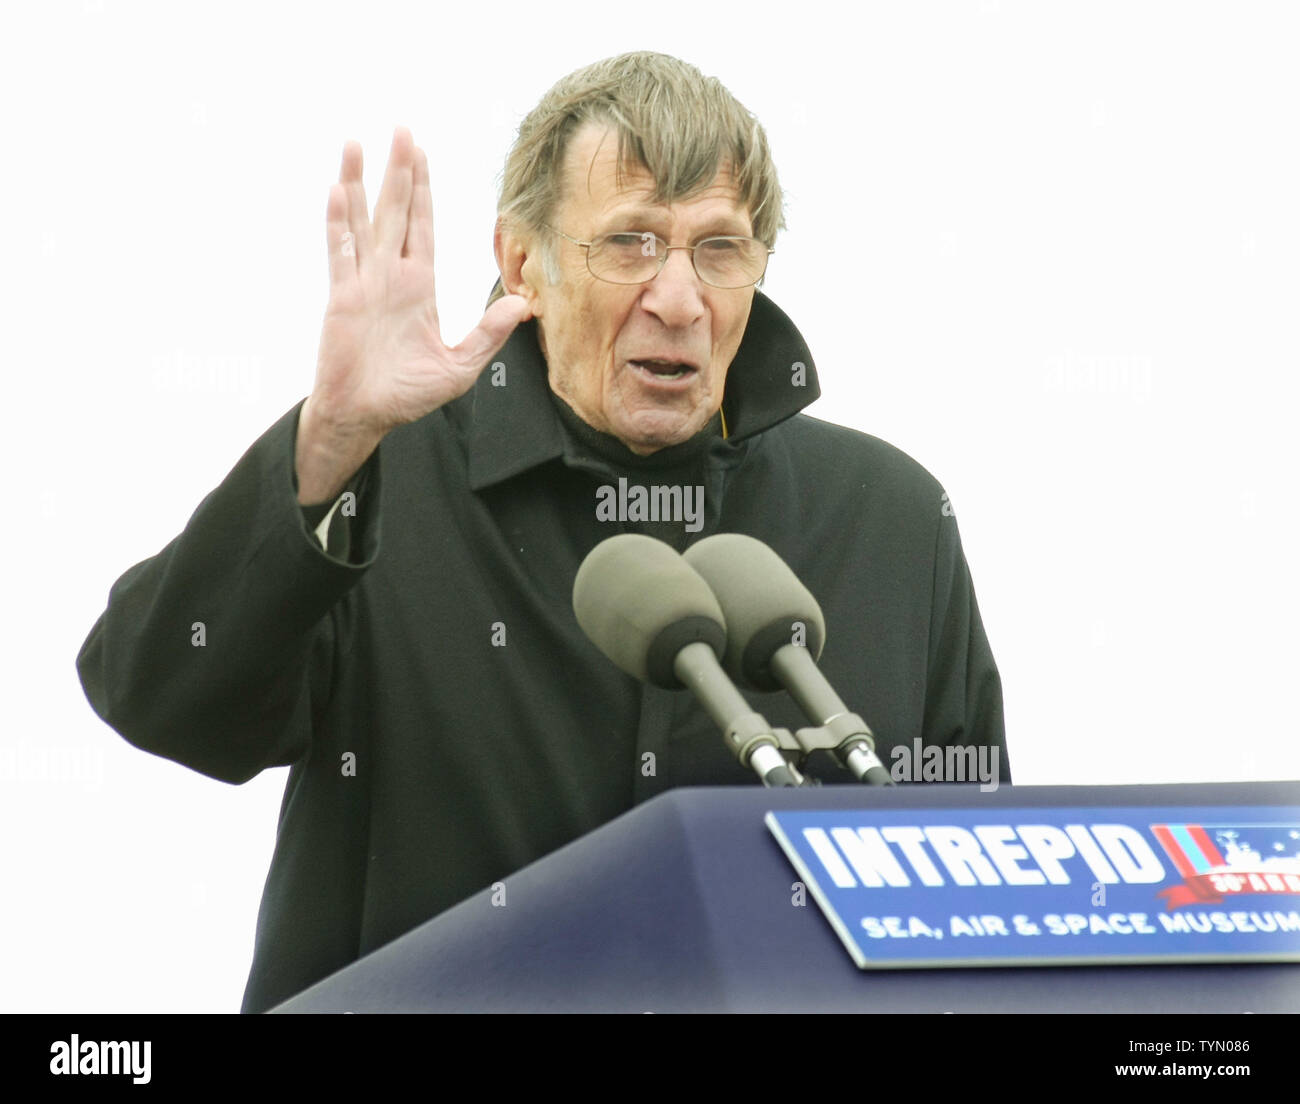 Leonard Nimoy, who played the character Mr. Spock in the TV series 'Star Trek,' speaks at a ceremony following the landing of the Space Shuttle Enterprise at John F. Kennedy International Airport on April 27, 2012 in New York City. Enterprise is part of NASA's retired space shuttle program and will be permanently displayed at the Intrepid Sea, Air & Space Museum starting in June.     UPI/ Monika Graff Stock Photo